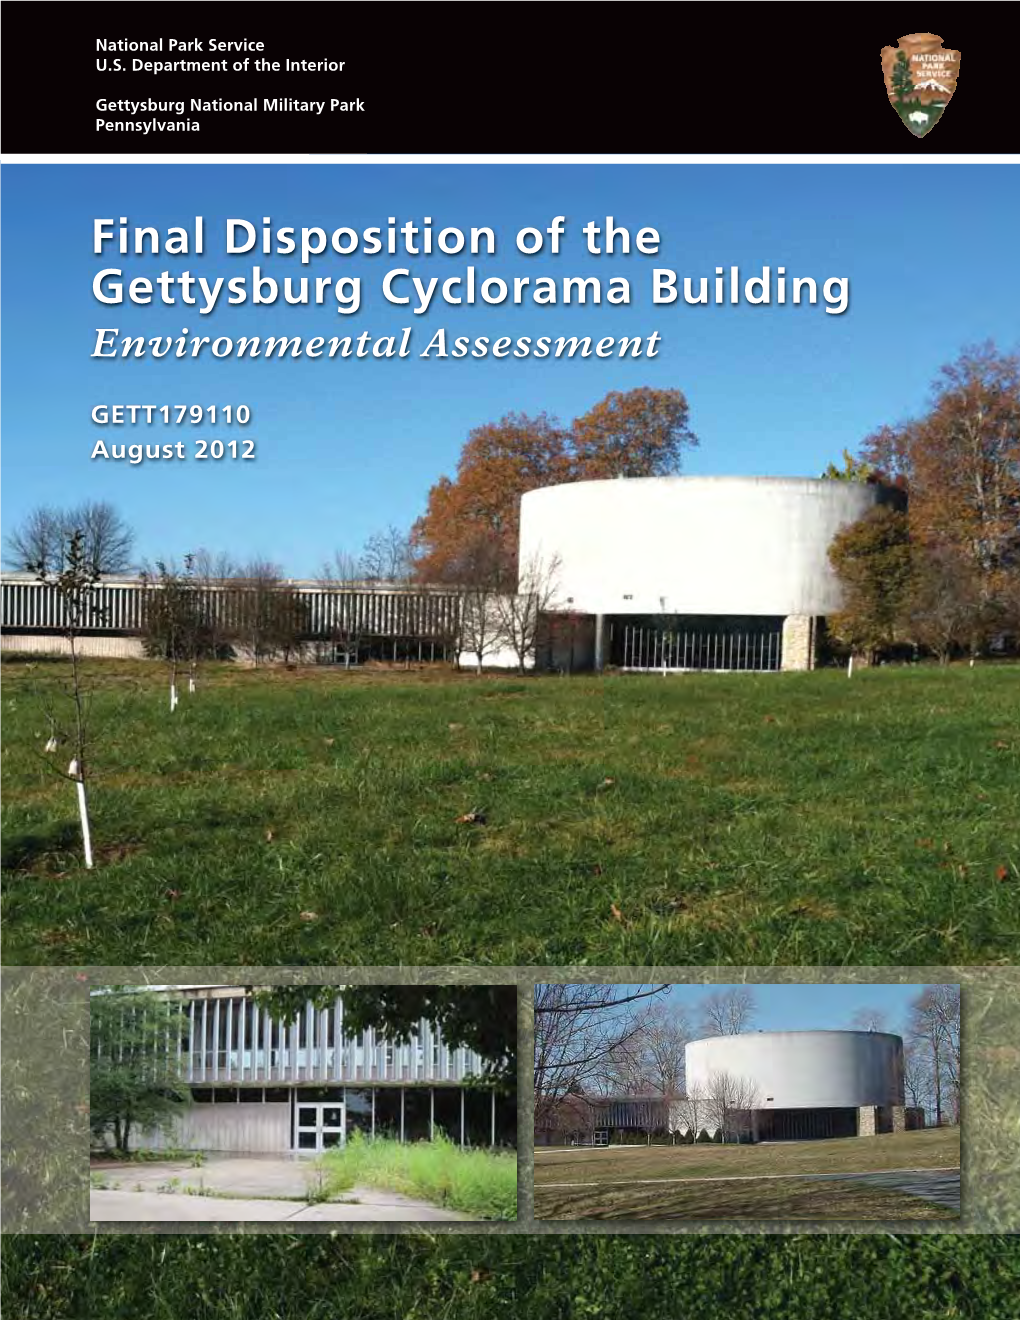 Final Disposition of the Gettysburg Cyclorama Building Environmental Assessment